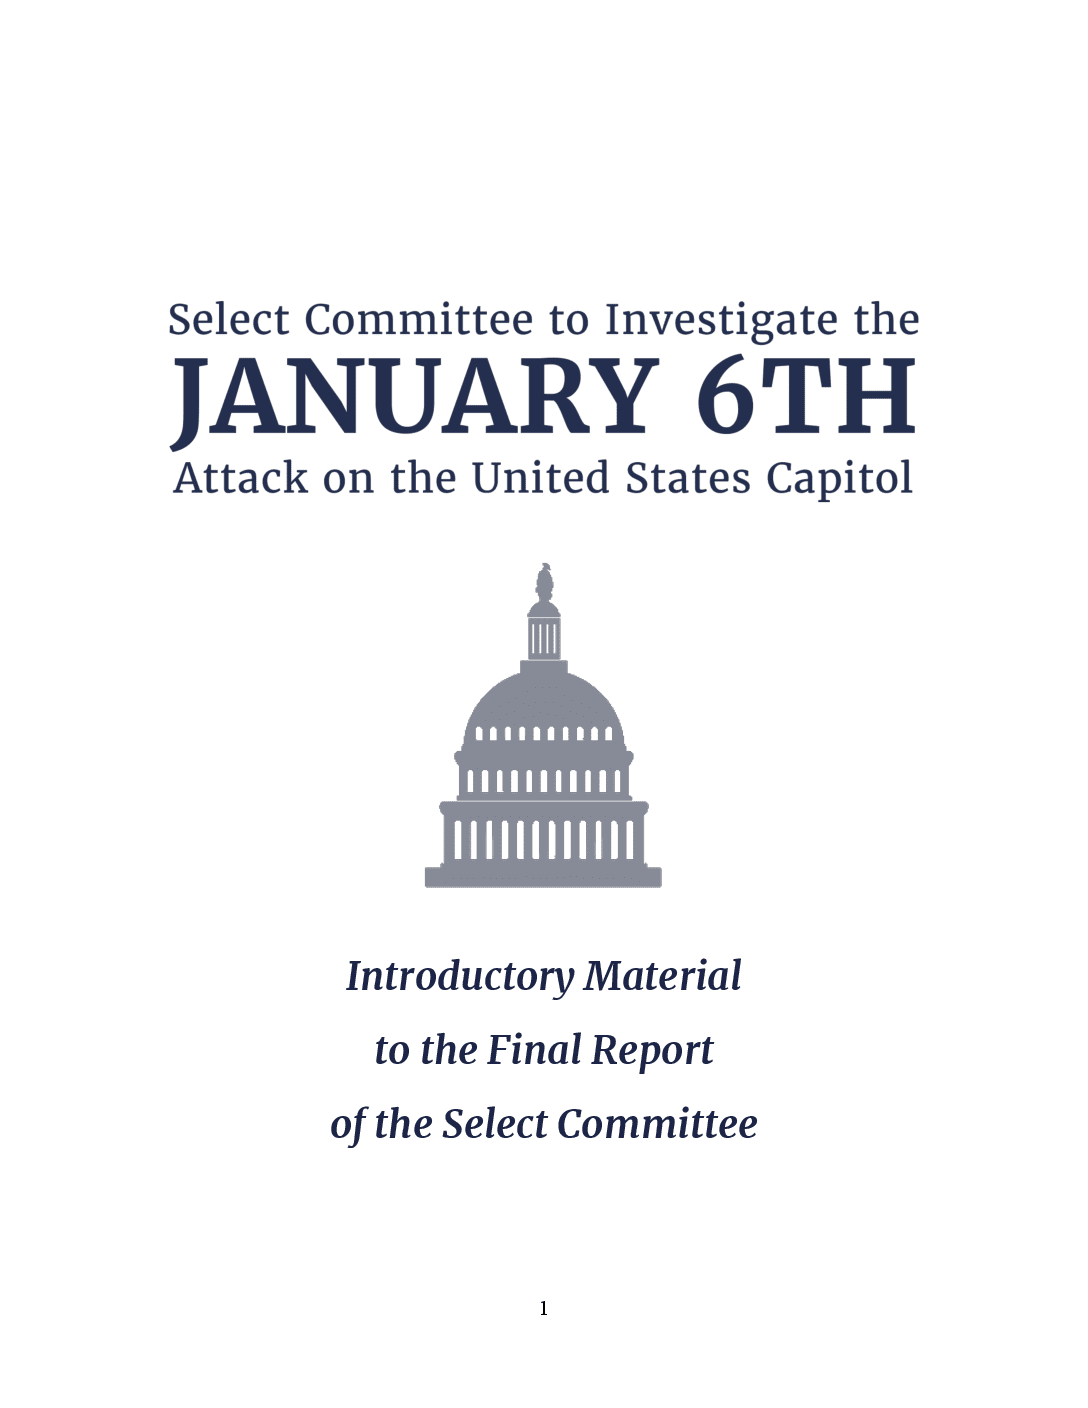 cover for January 6 Commitee Report - Executive Summary by Select Committee to Investigate the January 6th Attack on United States Capitol